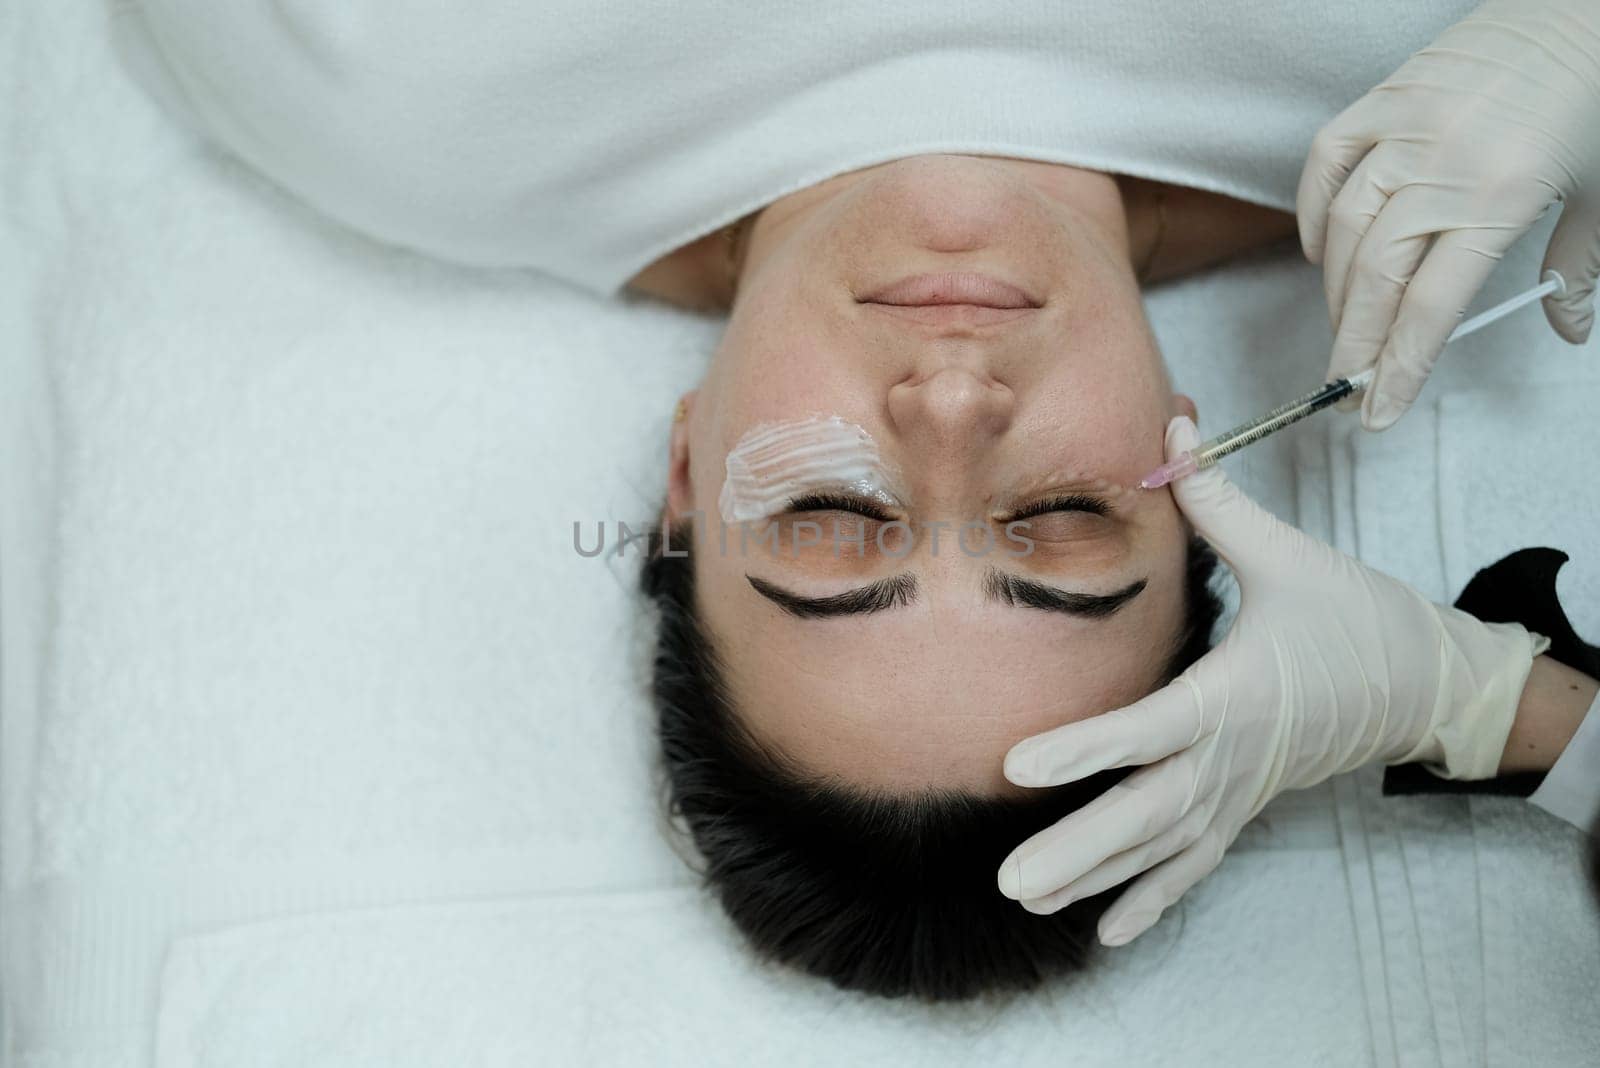 Top view of female patient having eye mesotheraphy applied. Eye mesotherapy procedure. Serum being applied in the undereye area via a syringe.